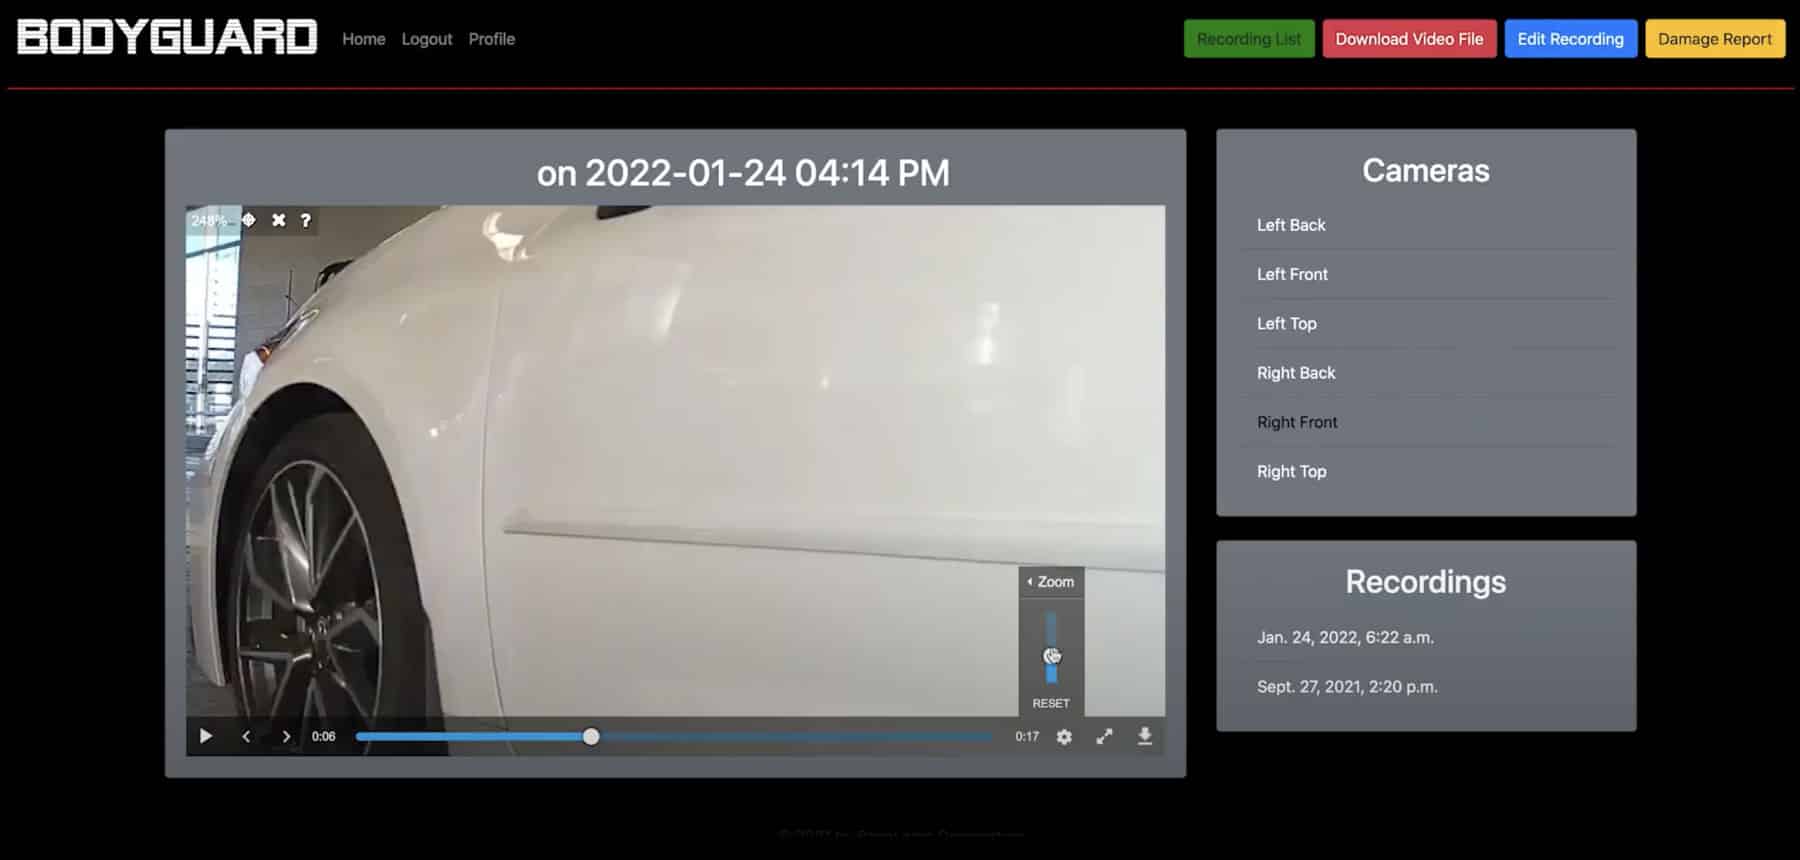 A desktop view of the Bodyguard interface shows the mouse cursor dragging the zoom feature to zoom in on the camera feed filming a white SUV.